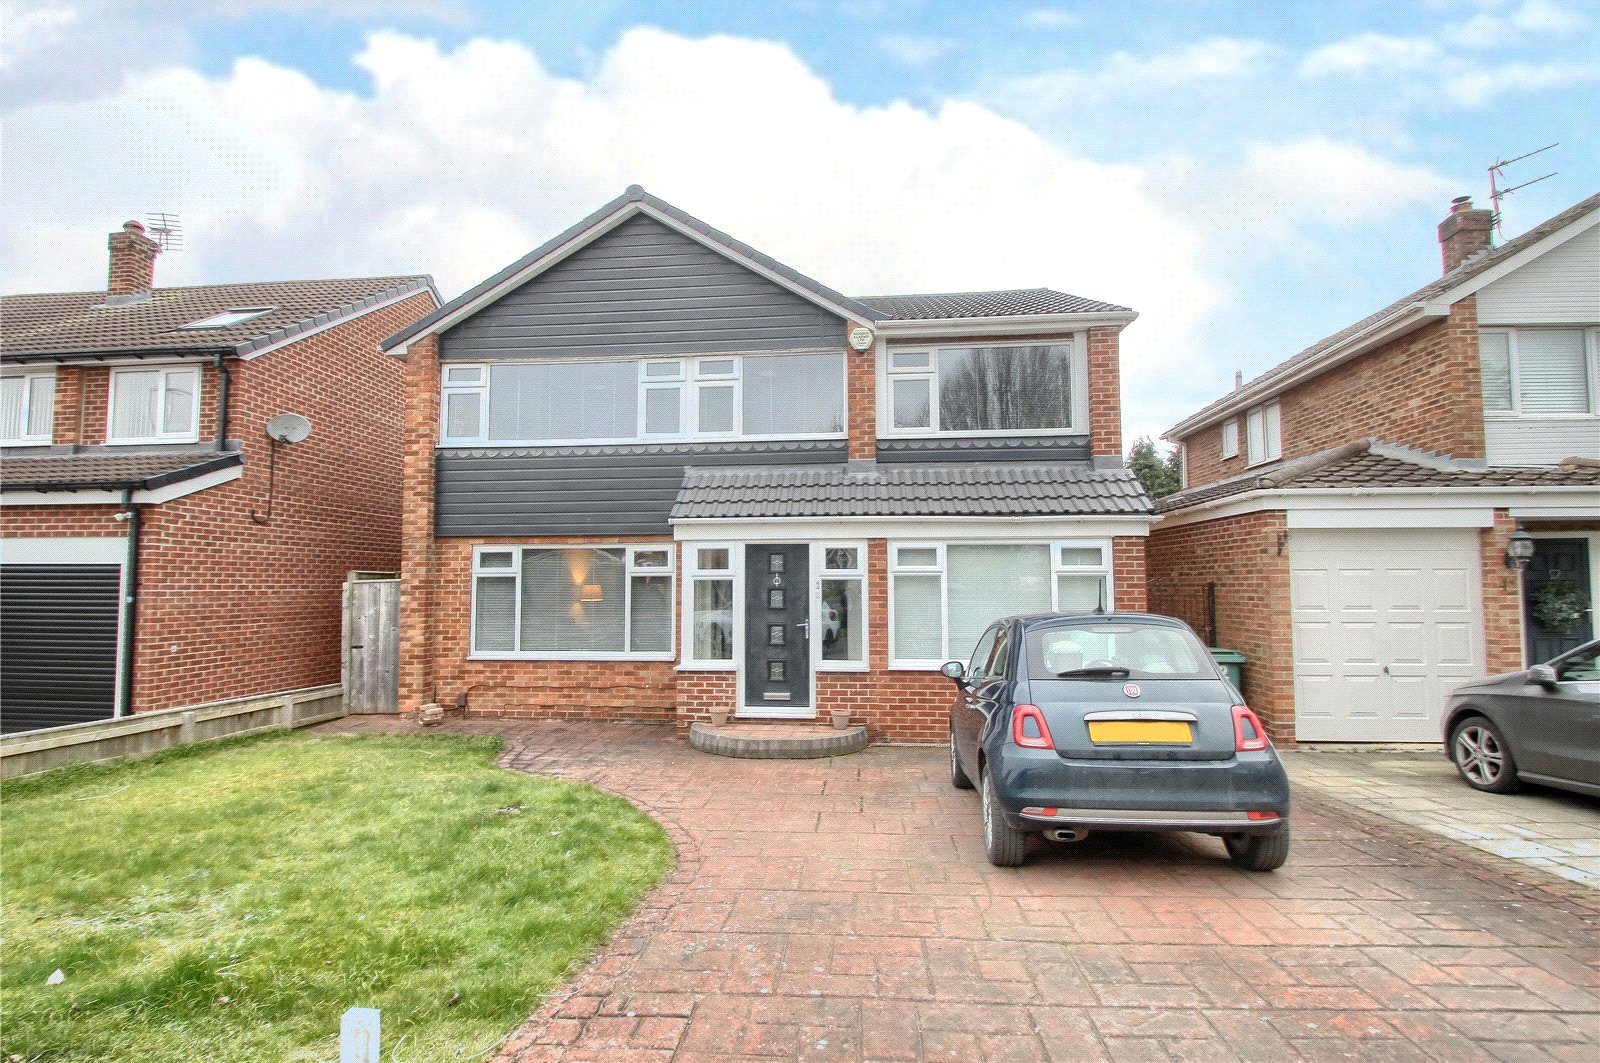 5 bed house for sale in Meadowfield Drive, Eaglescliffe 1